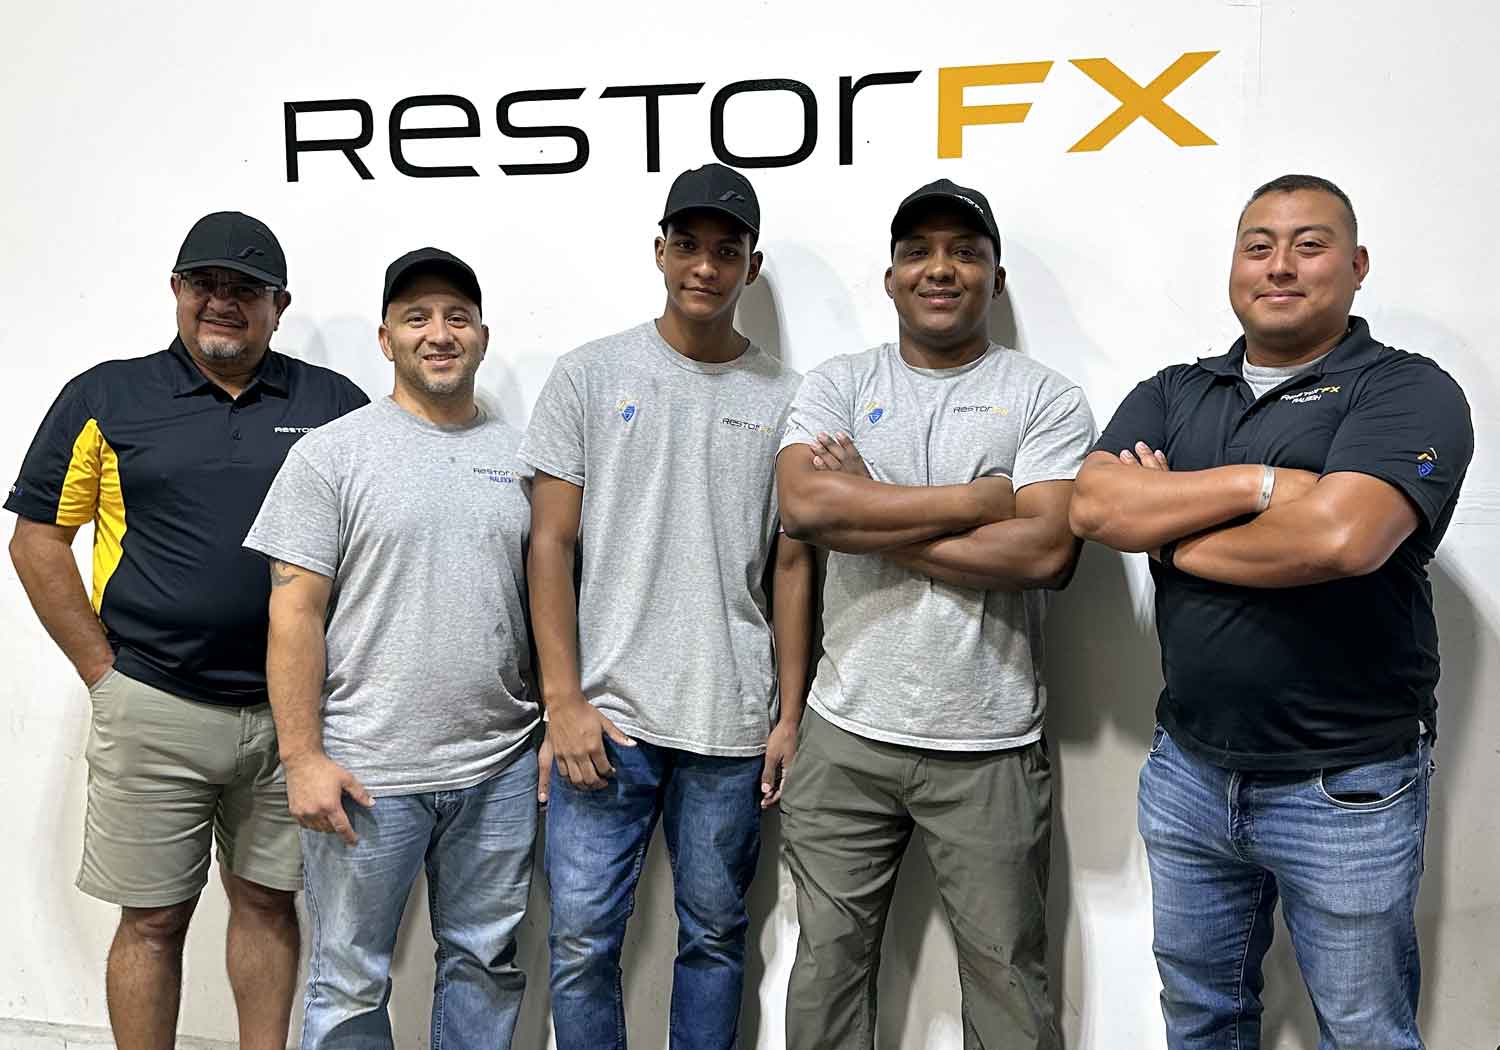 RestorFX Raleigh team in front of a white branded wall